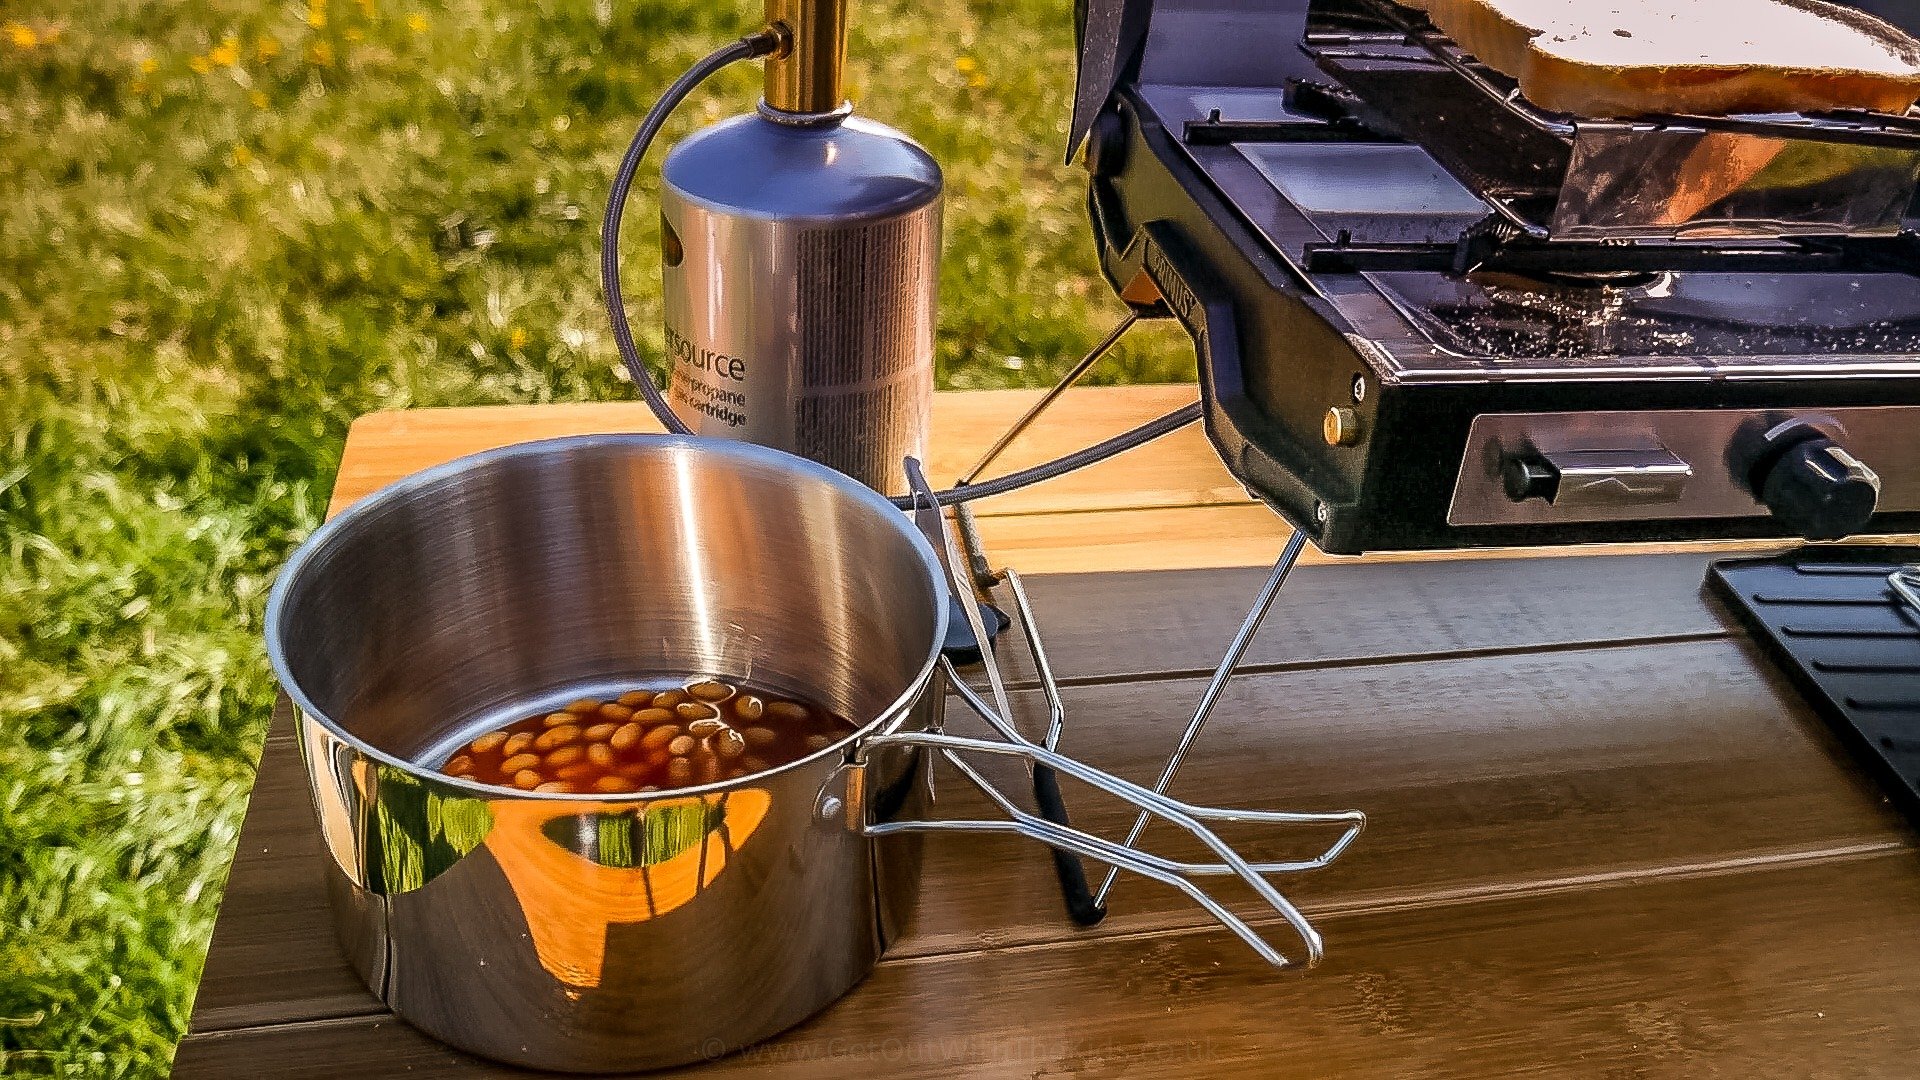 Primus CampFire Cookset S/S - Small Reviews - Trailspace